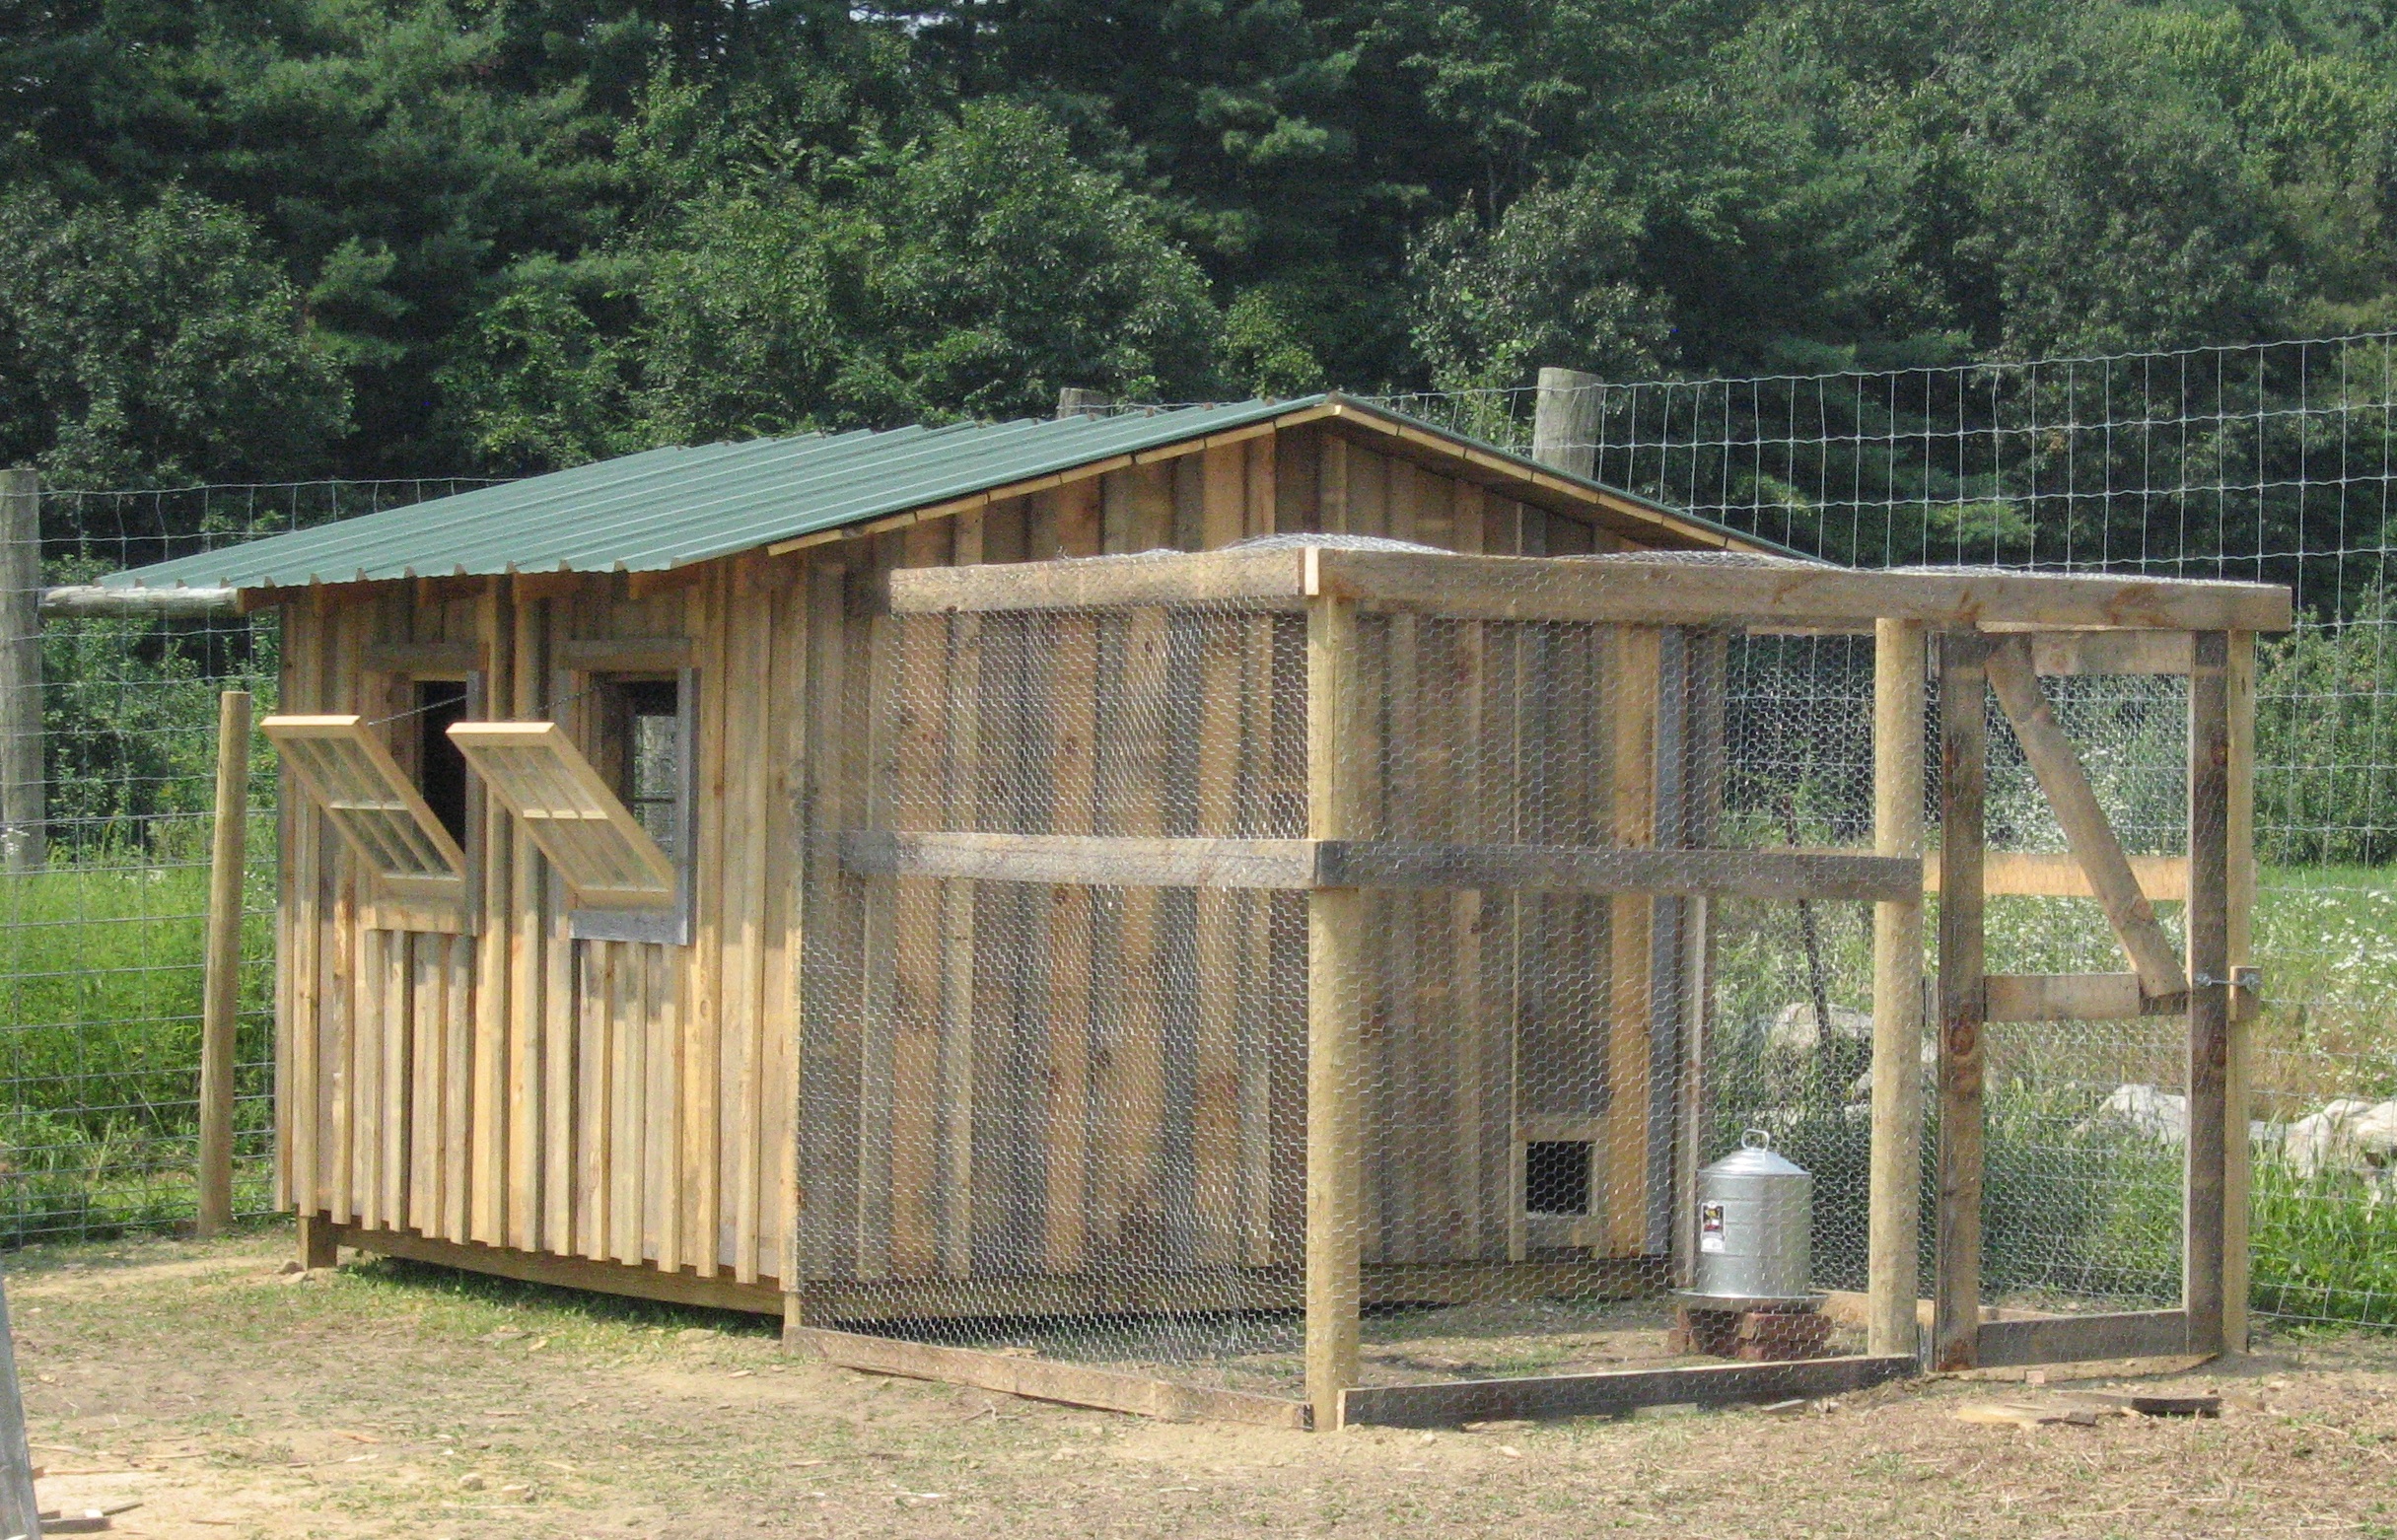 This coop was built at a local apple orchard. Inside there’s an area 